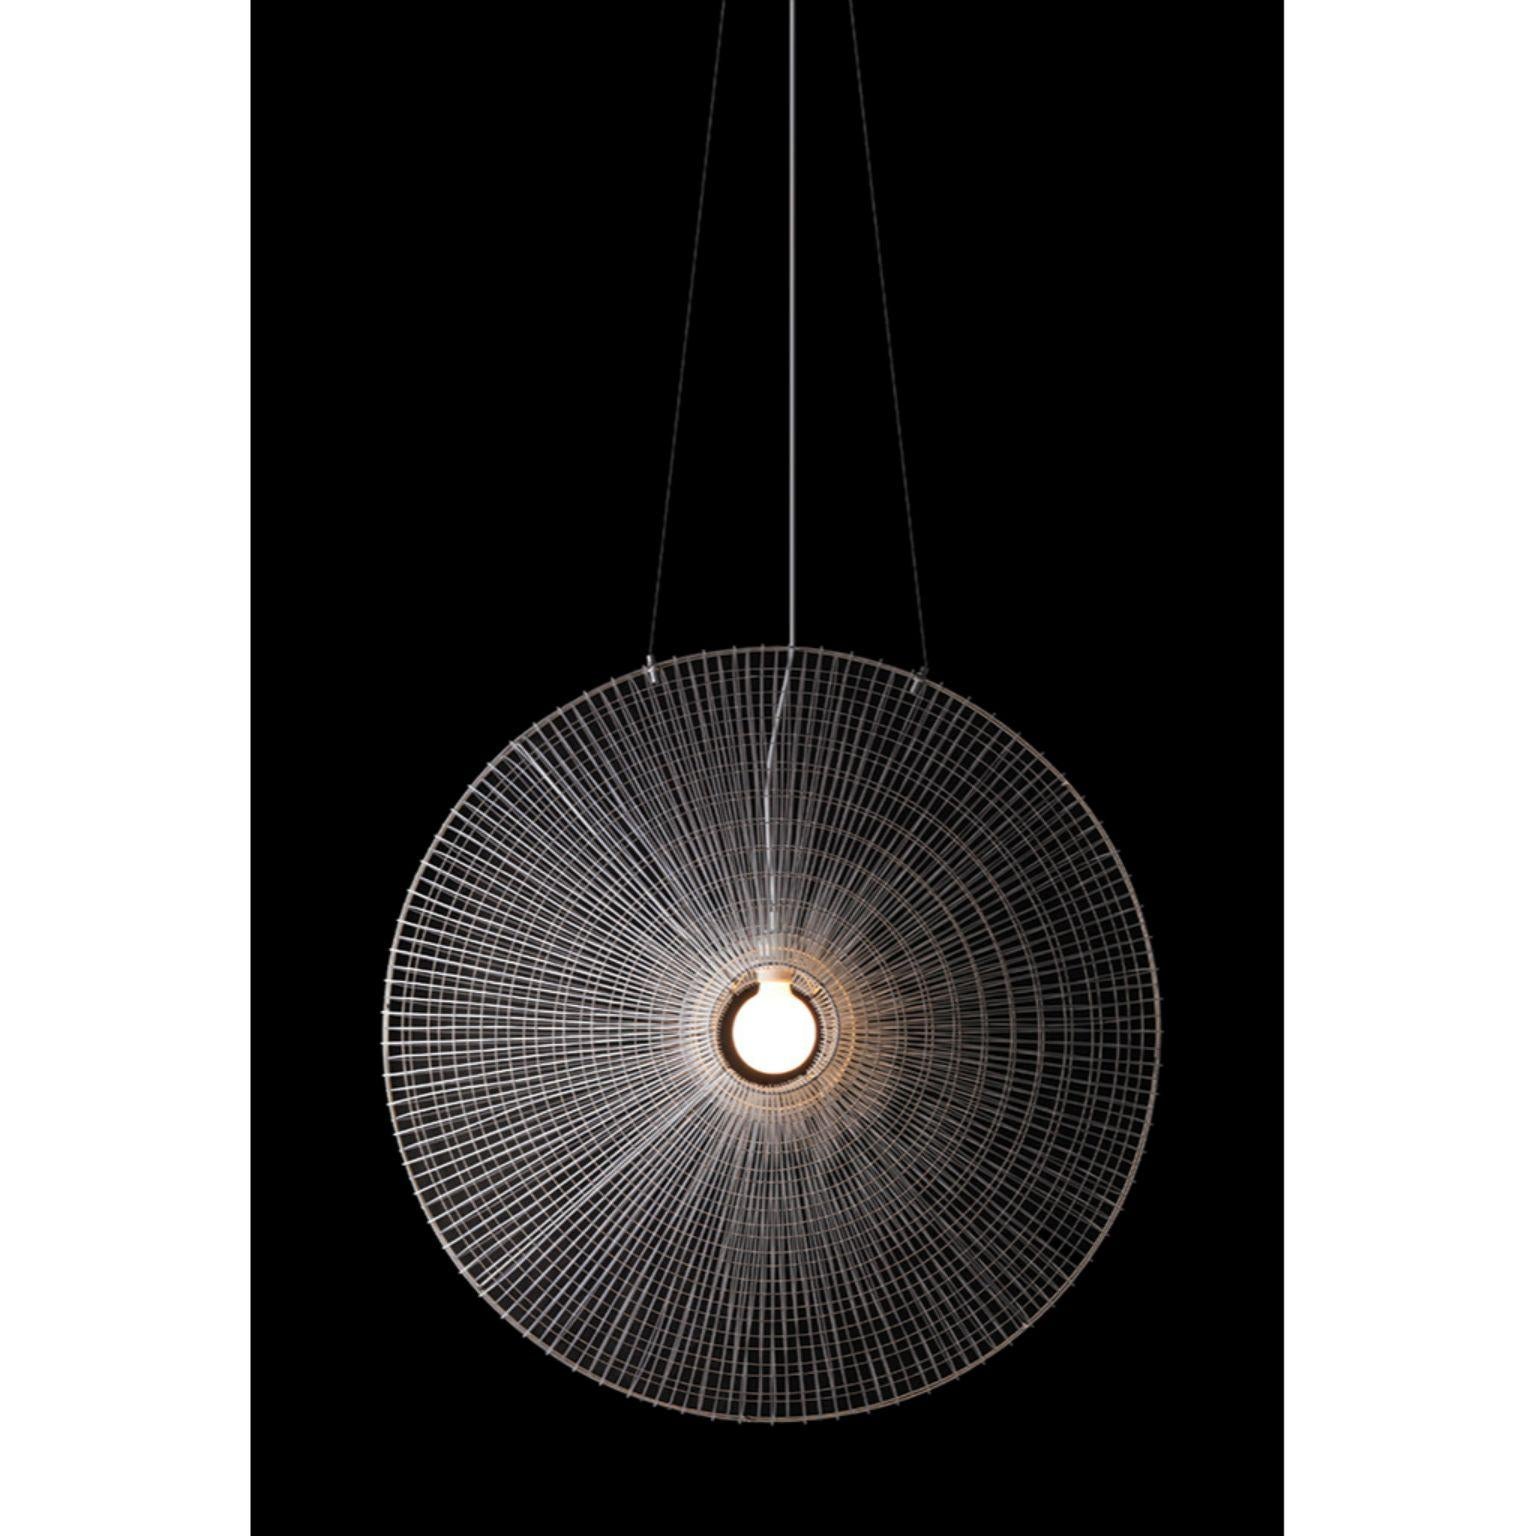 Halo pendant lamp, Kenneth Cobonpue
Materials: Nylon, powder-coated steel
Dimensions: D 30 x W 90 x H 150 cm

Kenneth Cobonpue is a multi-awarded furniture designer and manufacturer from Cebu, Philippines. His passage to design began in 1987,